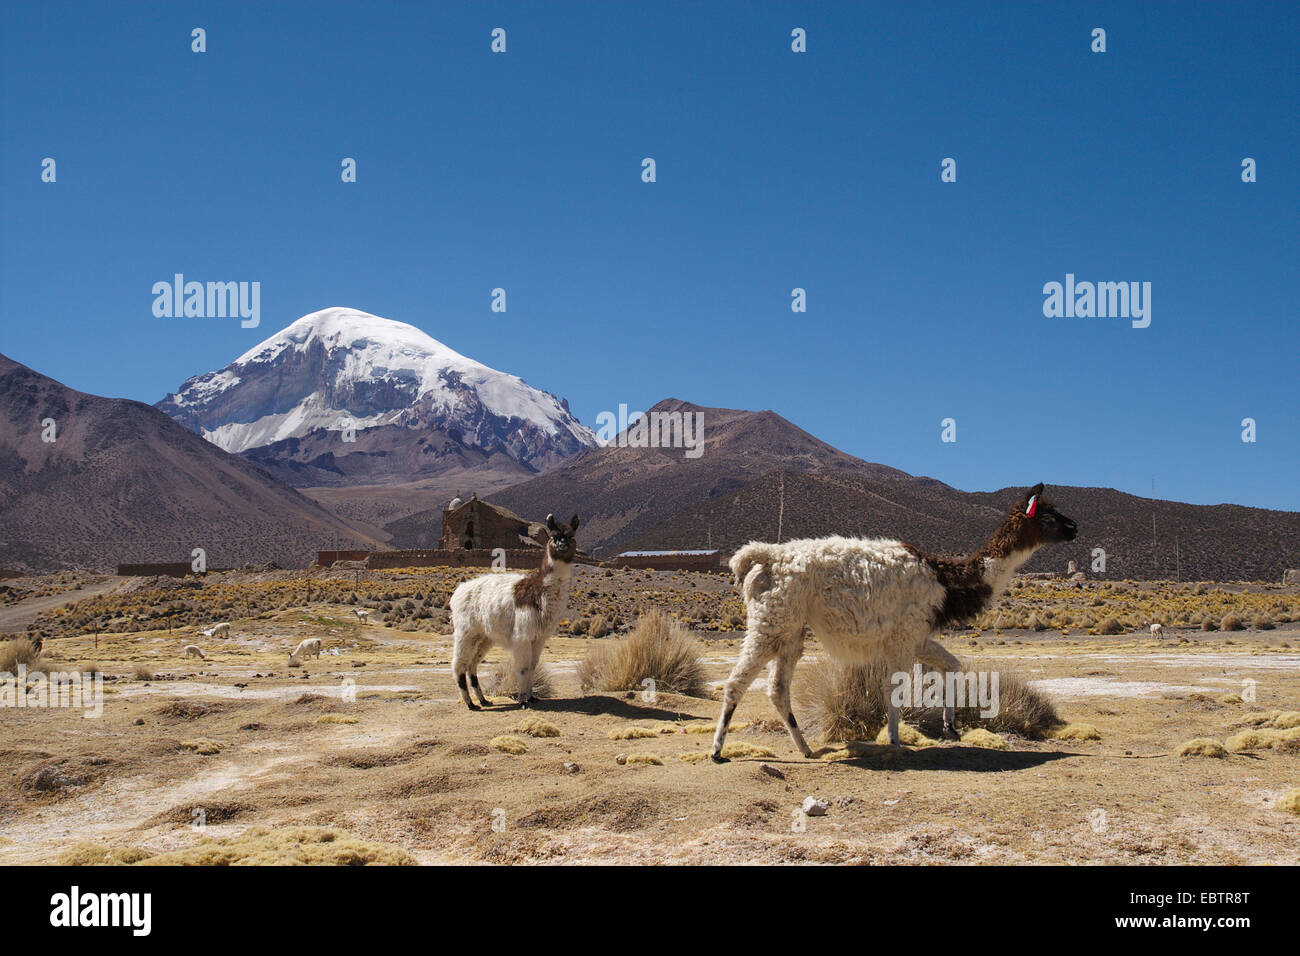 alpaca (Lama pacos), alpacas in front of the village and mountain Sajama, Bolivia, Andes Stock Photo